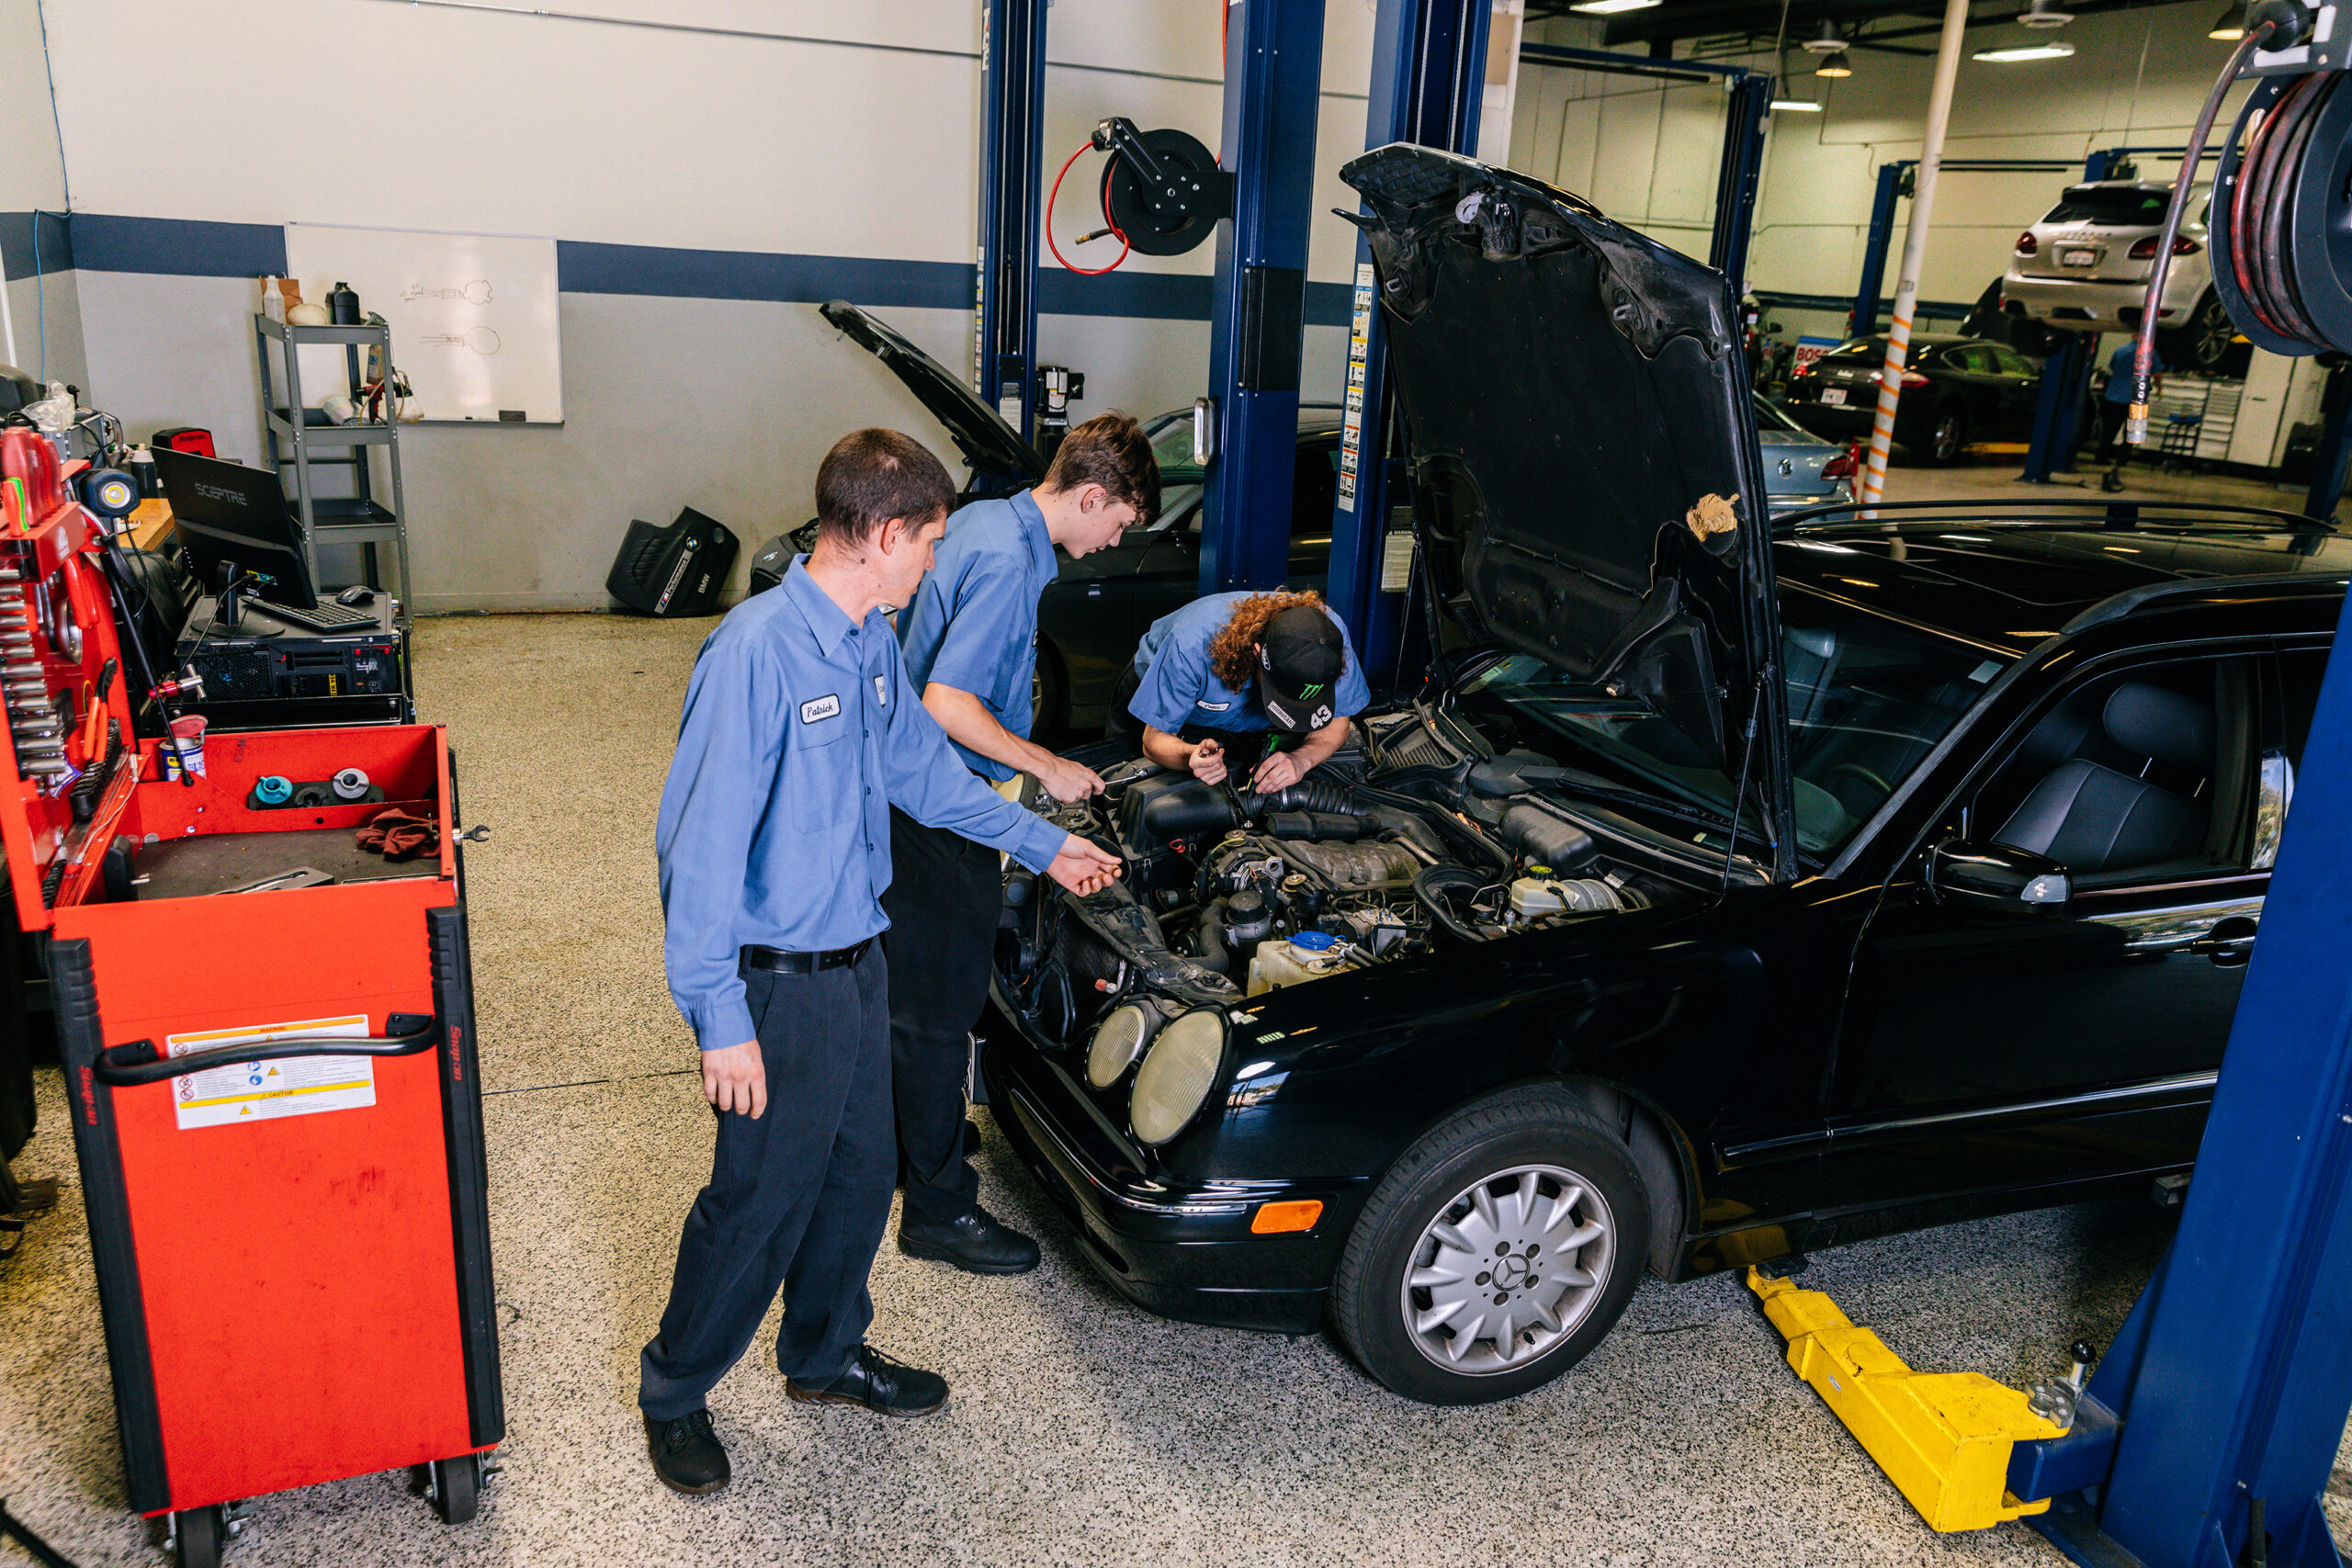 Three Project Workforce students look under the hood of a black car.